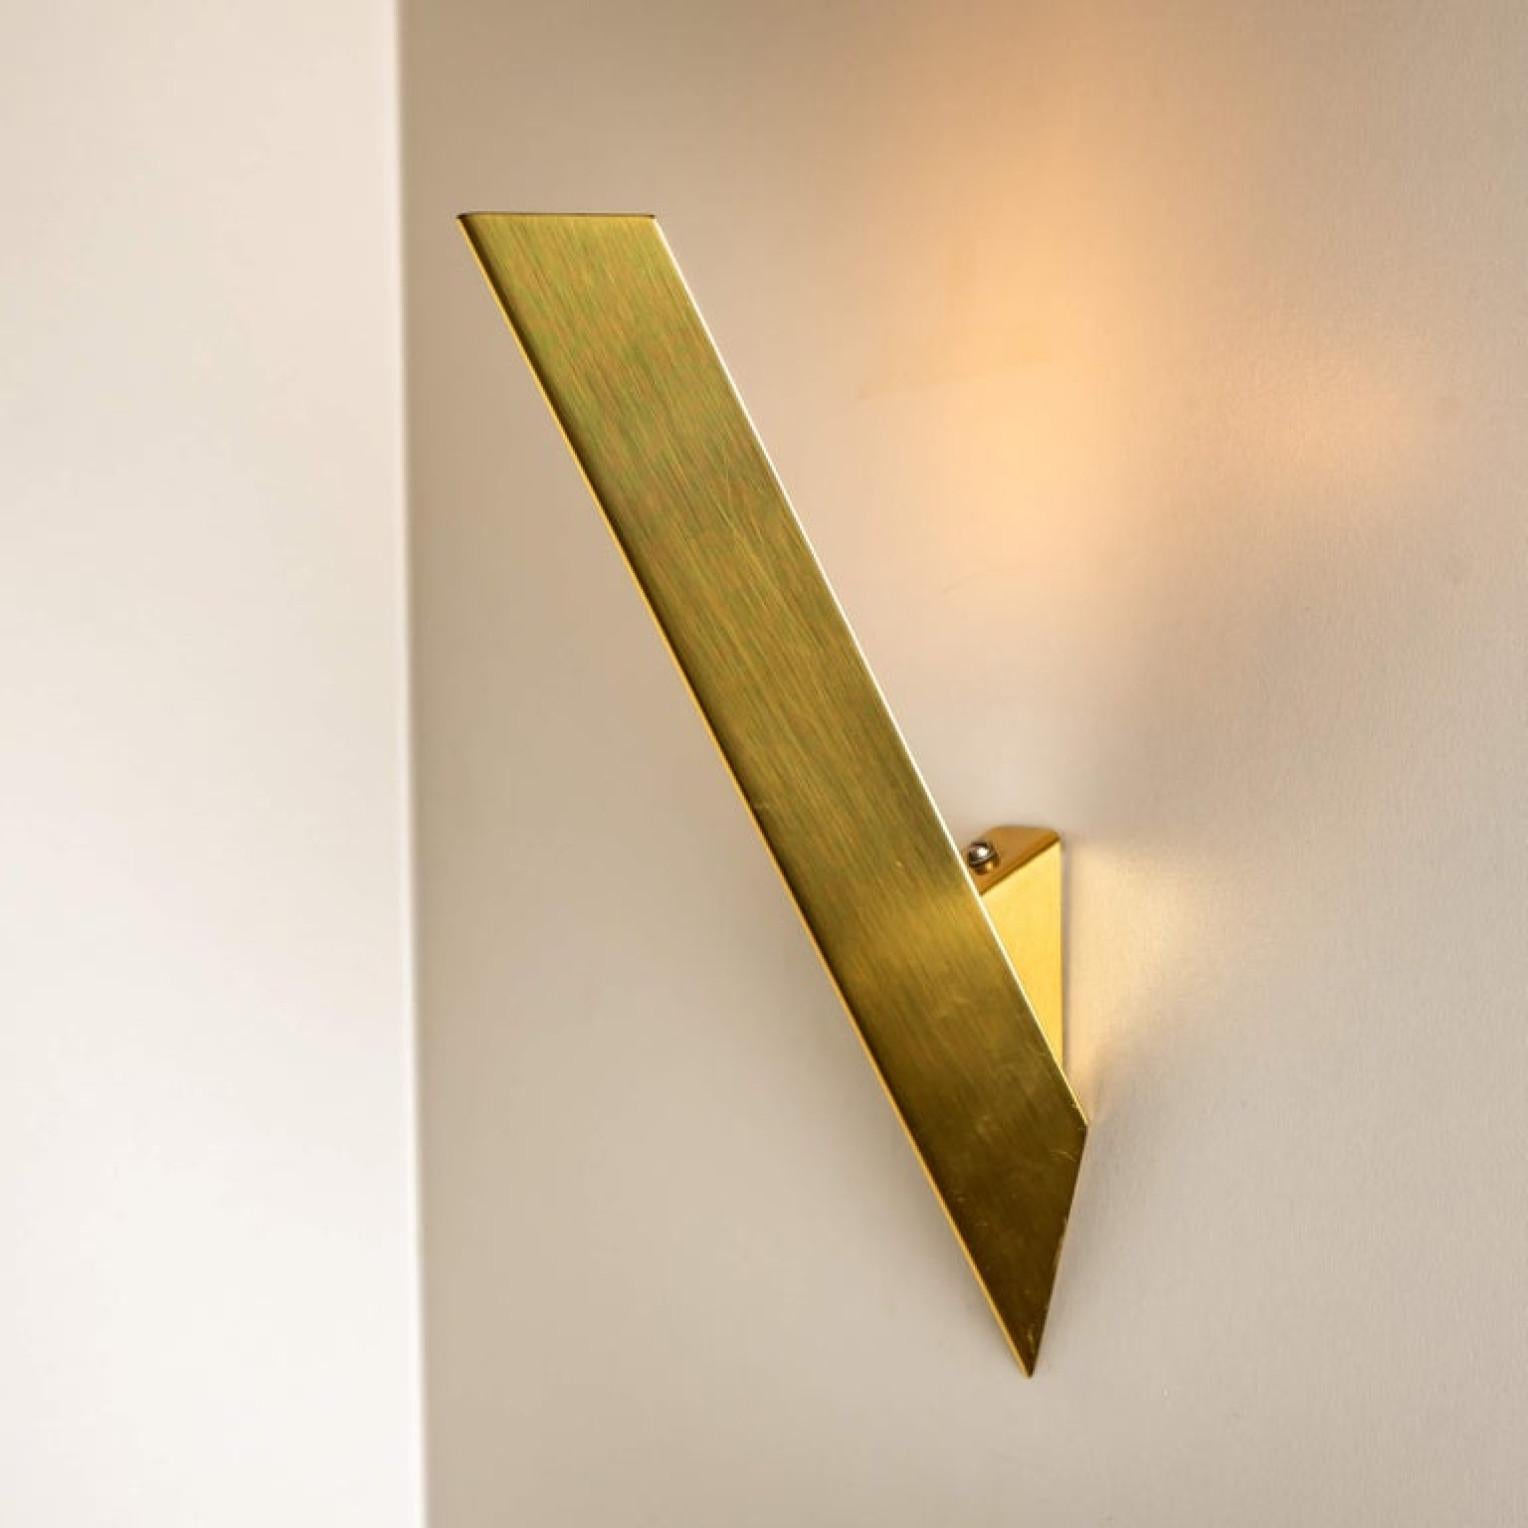 Other Pair of Wedge-Shaped High End Wall Lights by J.T. Kalmar, 1970s, Austria For Sale